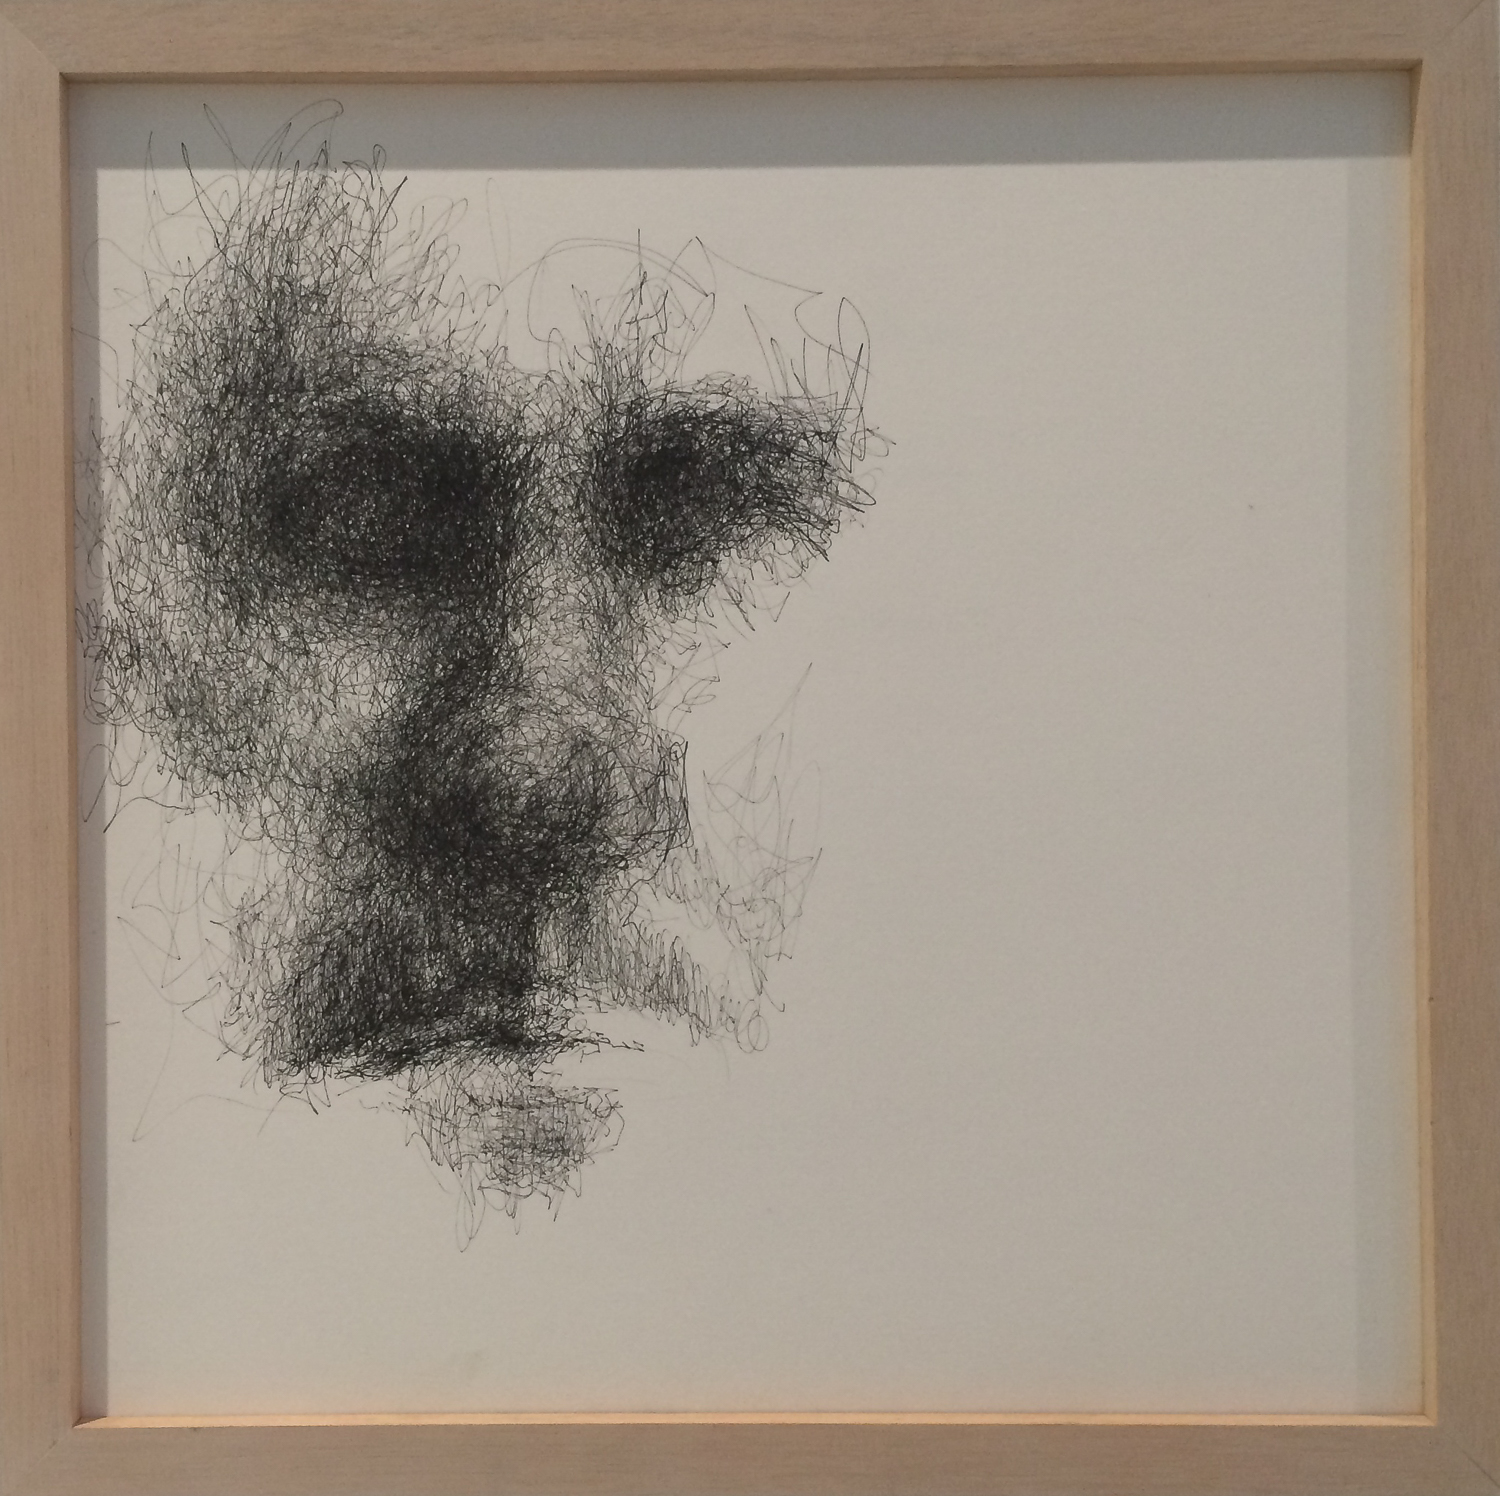 Ink on paper of a partially revealed face